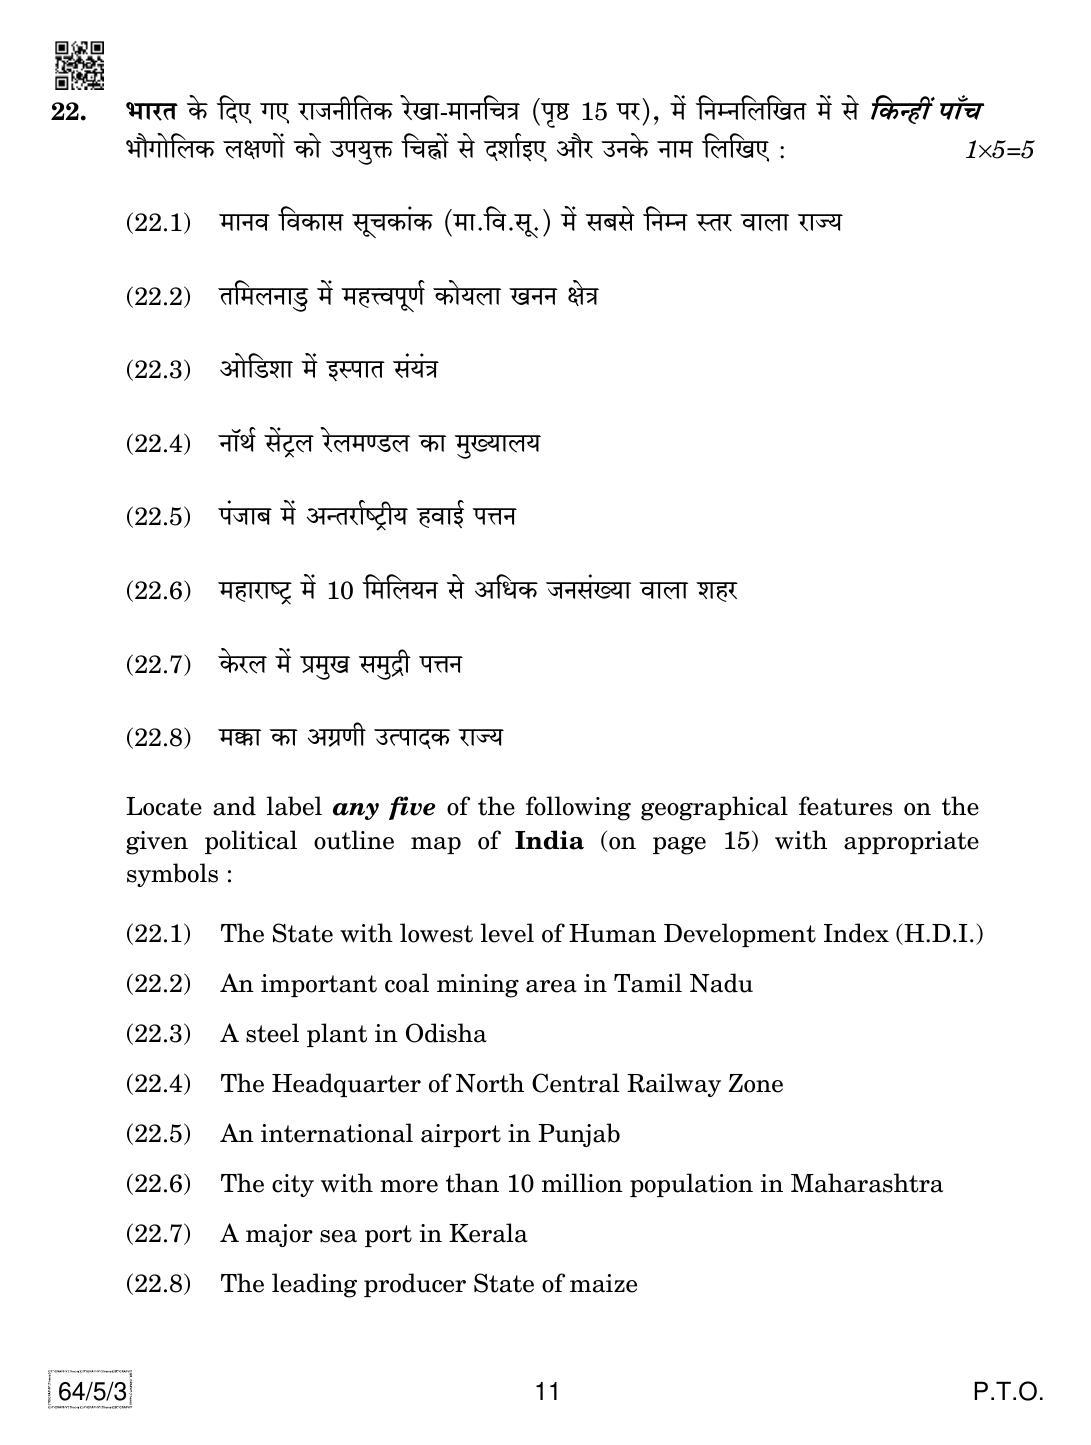 CBSE Class 12 64-5-3 Geography 2019 Question Paper - Page 11